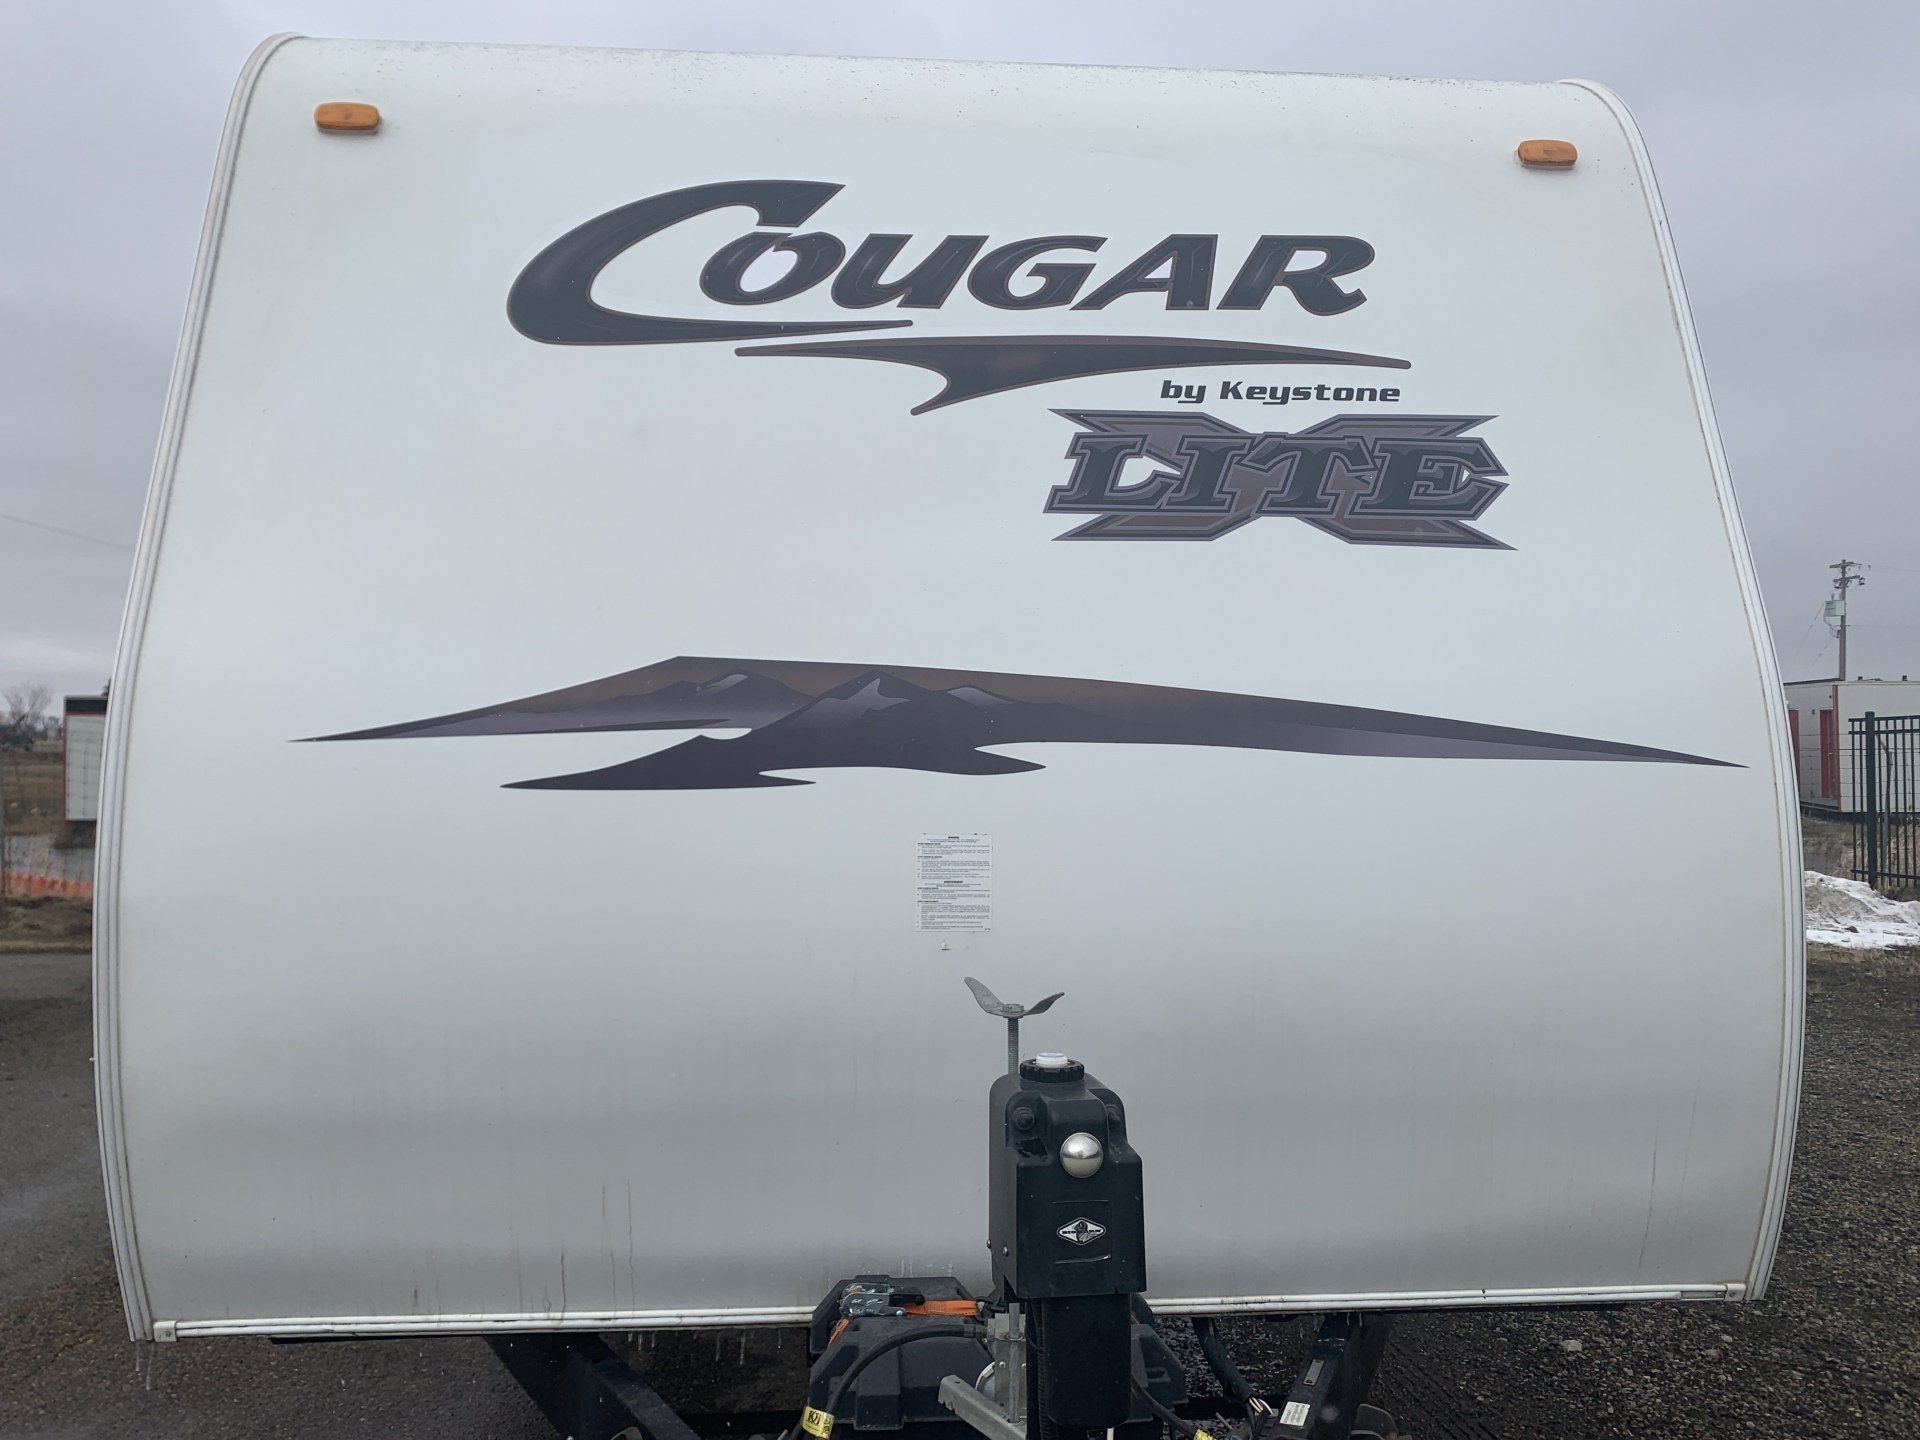 2020 - Alberta's Worst RV Decal Contest - Grand Prize Winner - Before & After - Pic 8